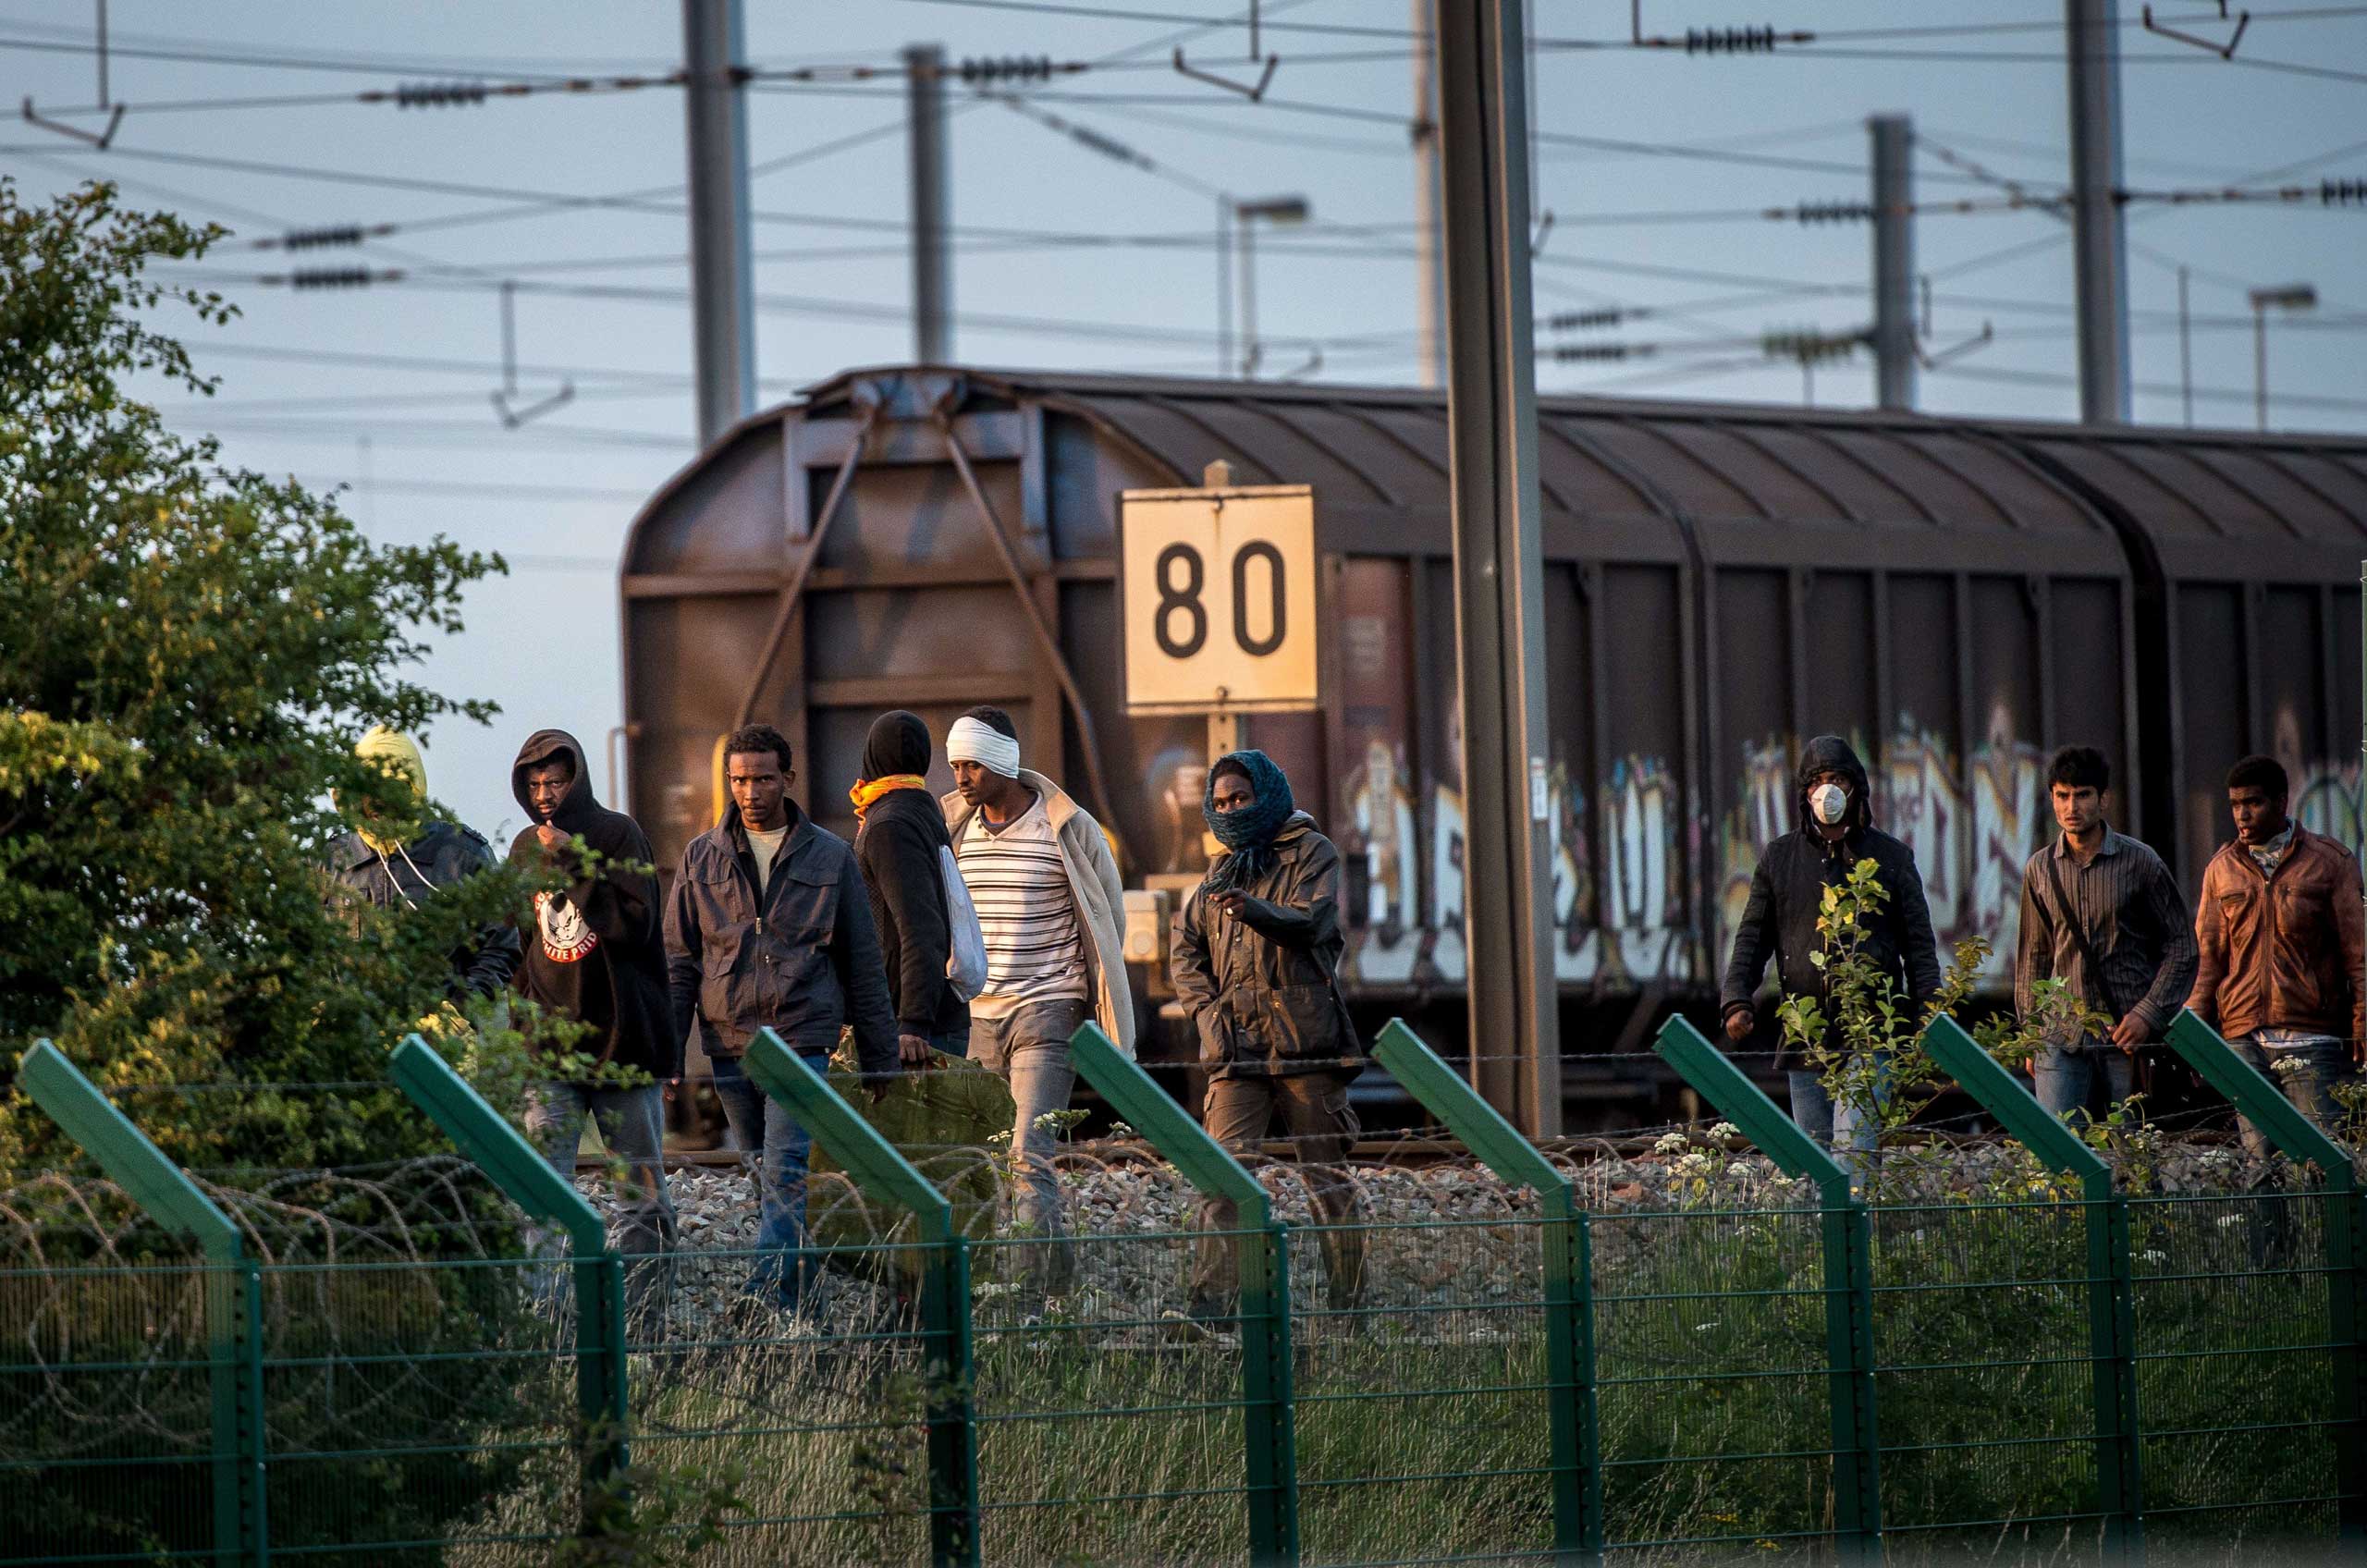 Migrants who successfully crossed the Eurotunnel terminal walk on the side of the railroad as they try to reach a shuttle to Great Britain,  in Frethun, northern France, on July 28, 2015.